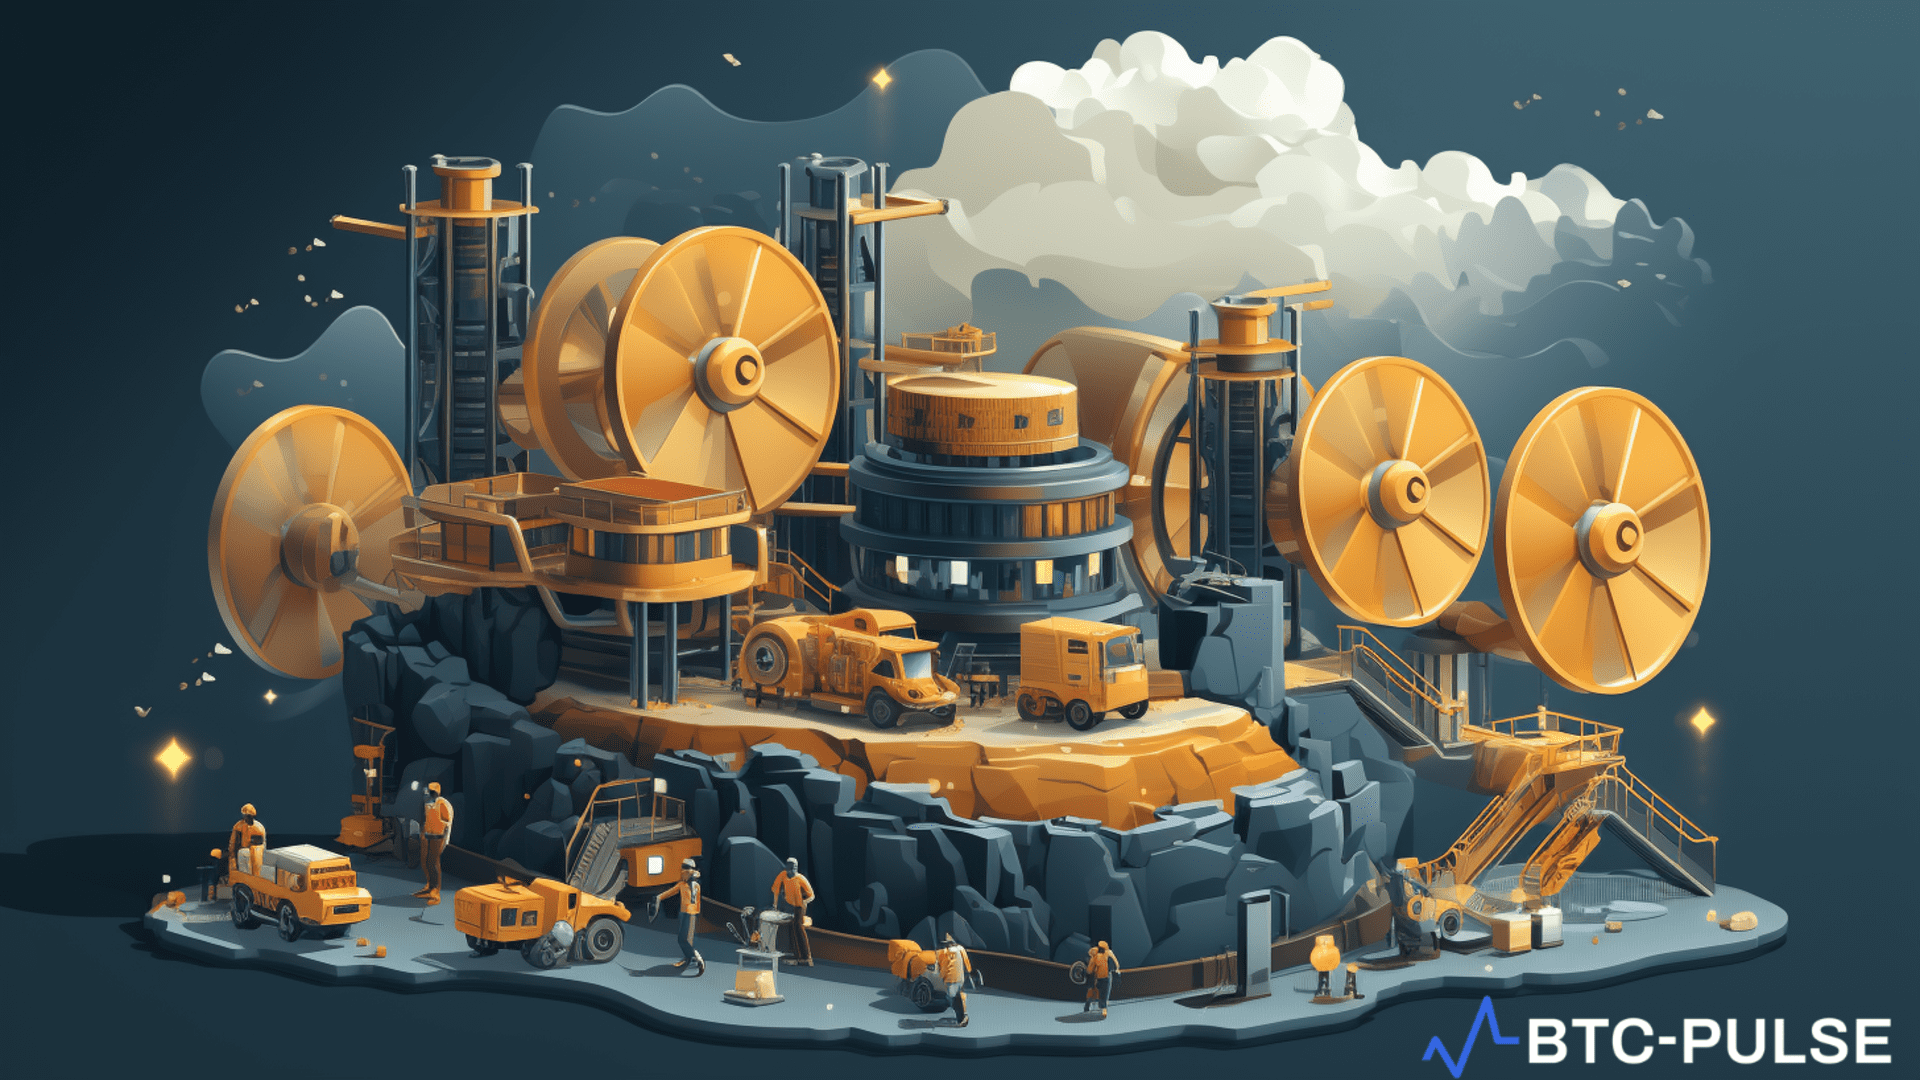 Illustration of BluestoneMining's cloud mining operations powered by renewable energy sources like solar and wind, highlighting the platform's commitment to eco-friendly and profitable cryptocurrency mining.